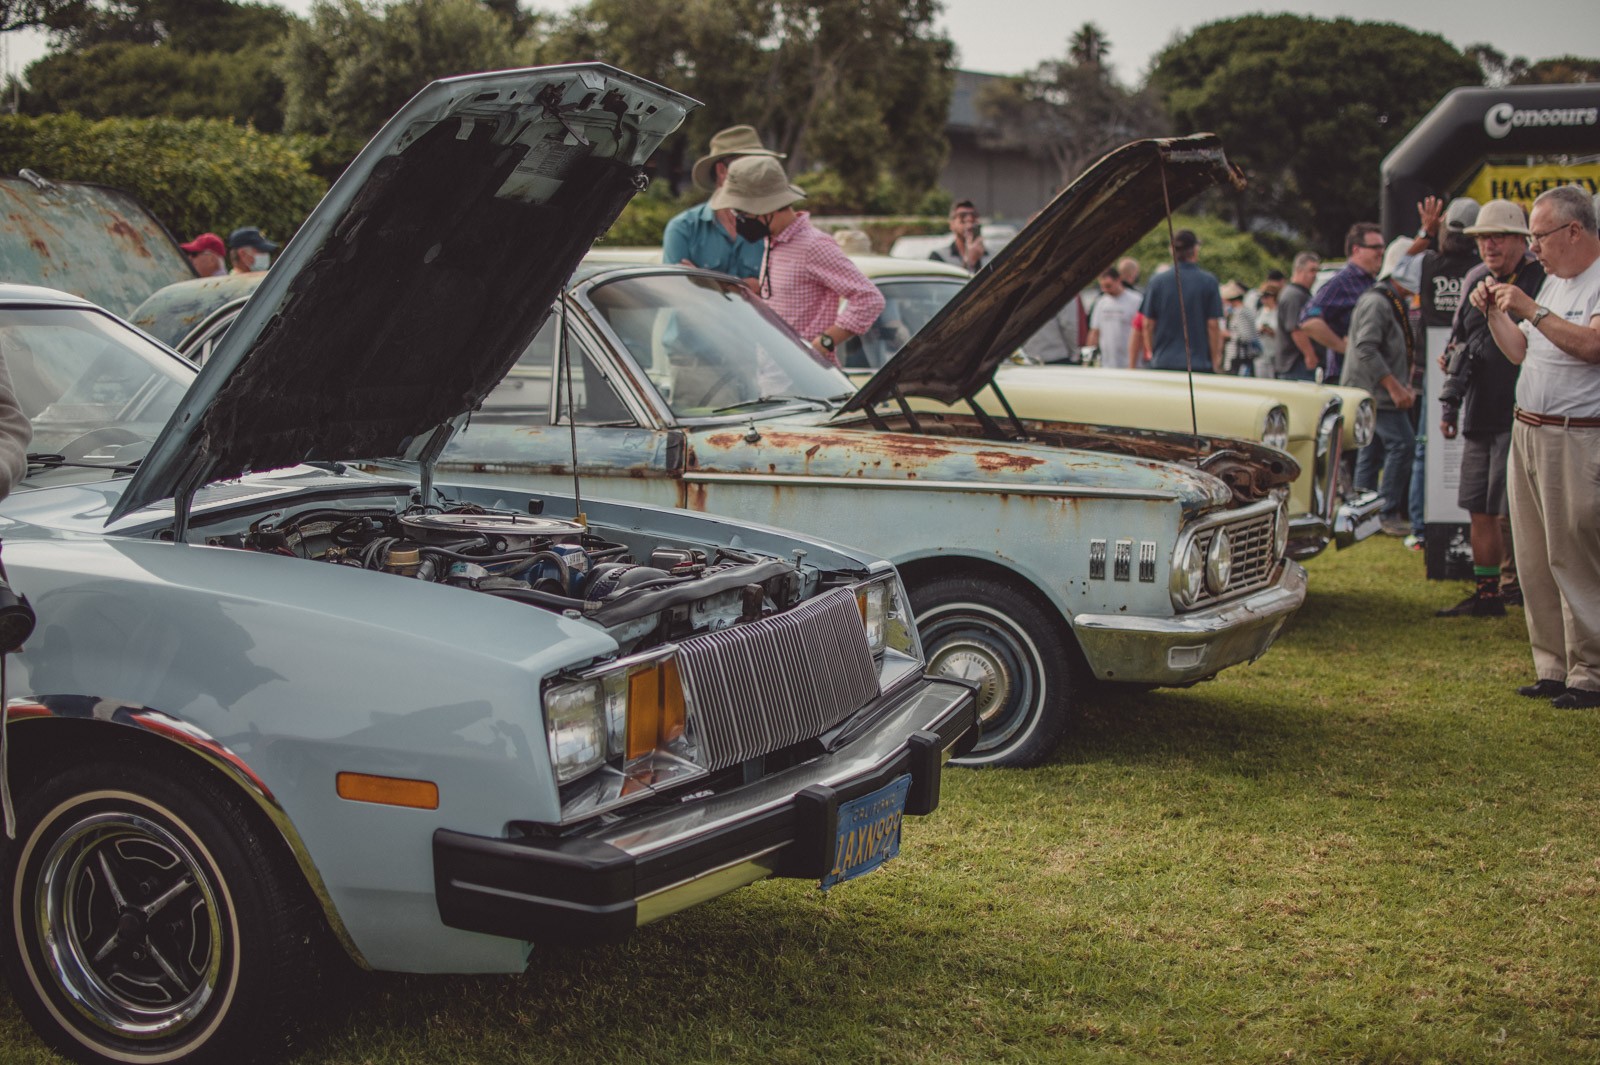 Pristine, rusted and oddballs show up to the Concours d'Lemons